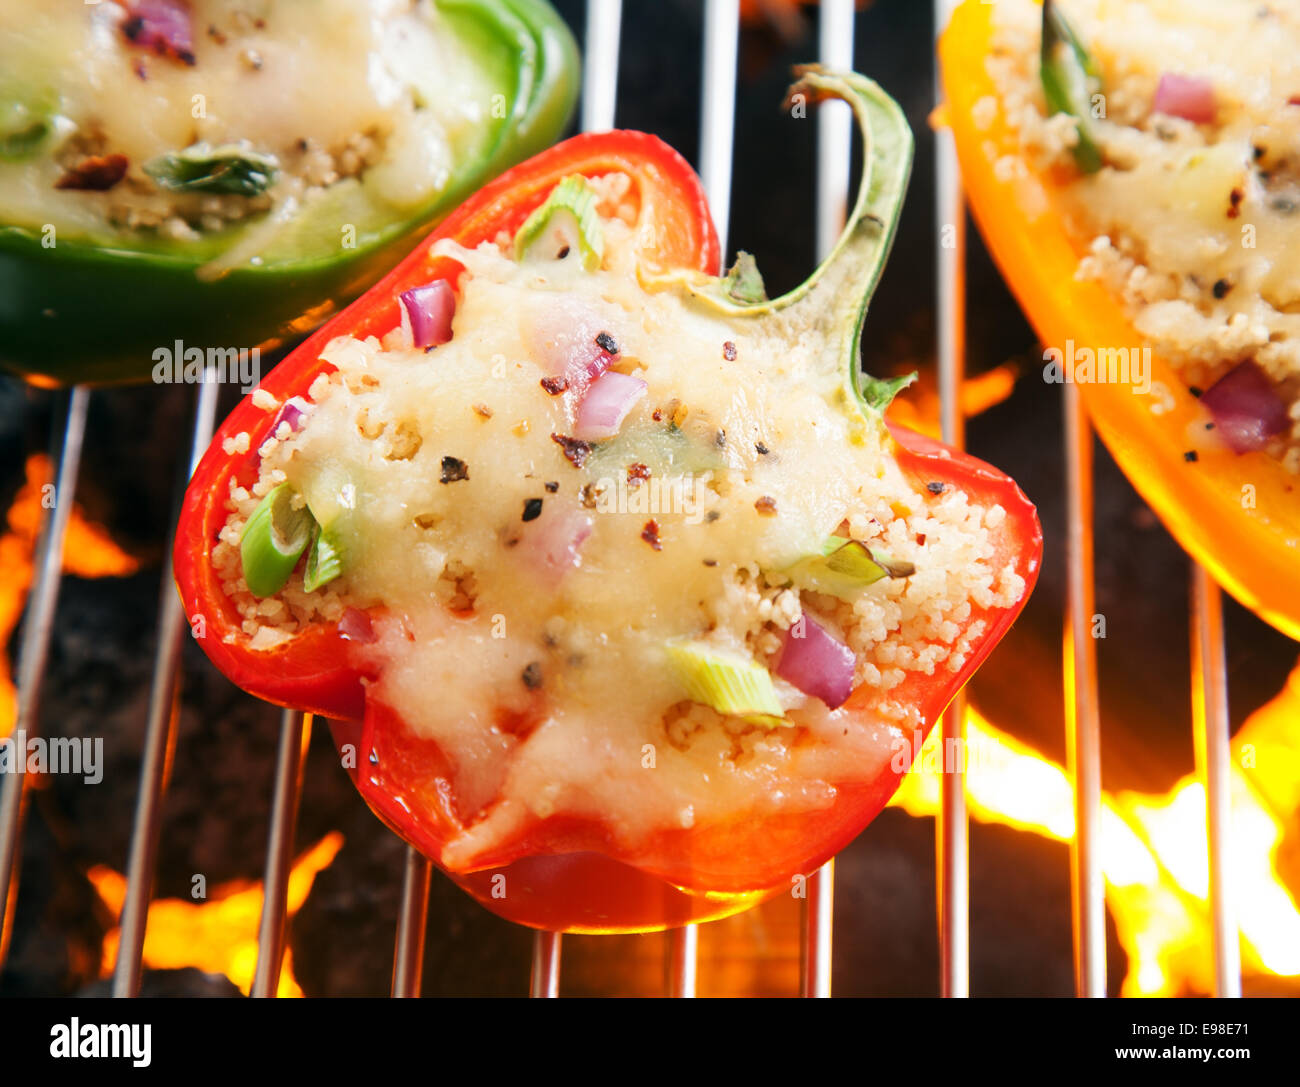 Savory stuffed sweet bell pepper with melted cheese grilling over the hot glowing coals on an outdoor barbecue, close up overhead view Stock Photo